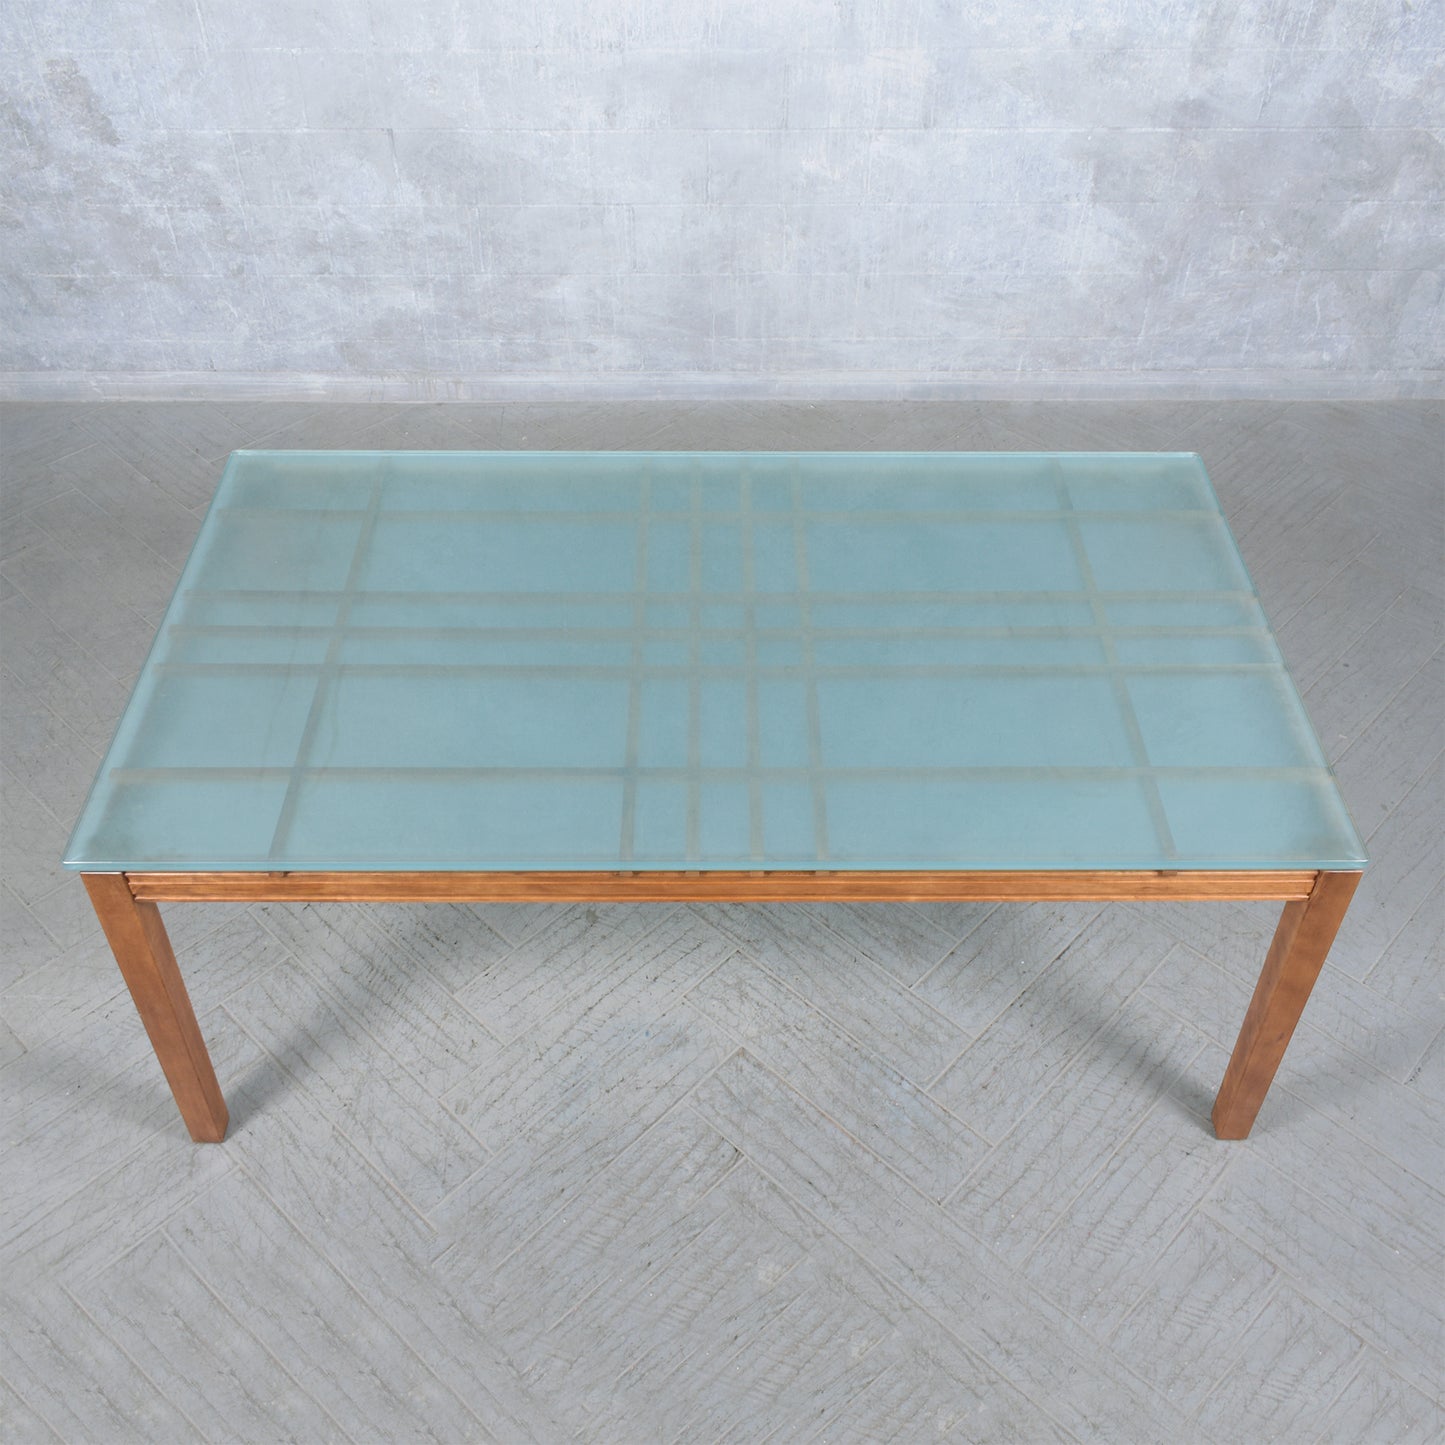 Vintage 1980s Mid Century Modern Dining Table: Solid Maple & Frosted Glass Top